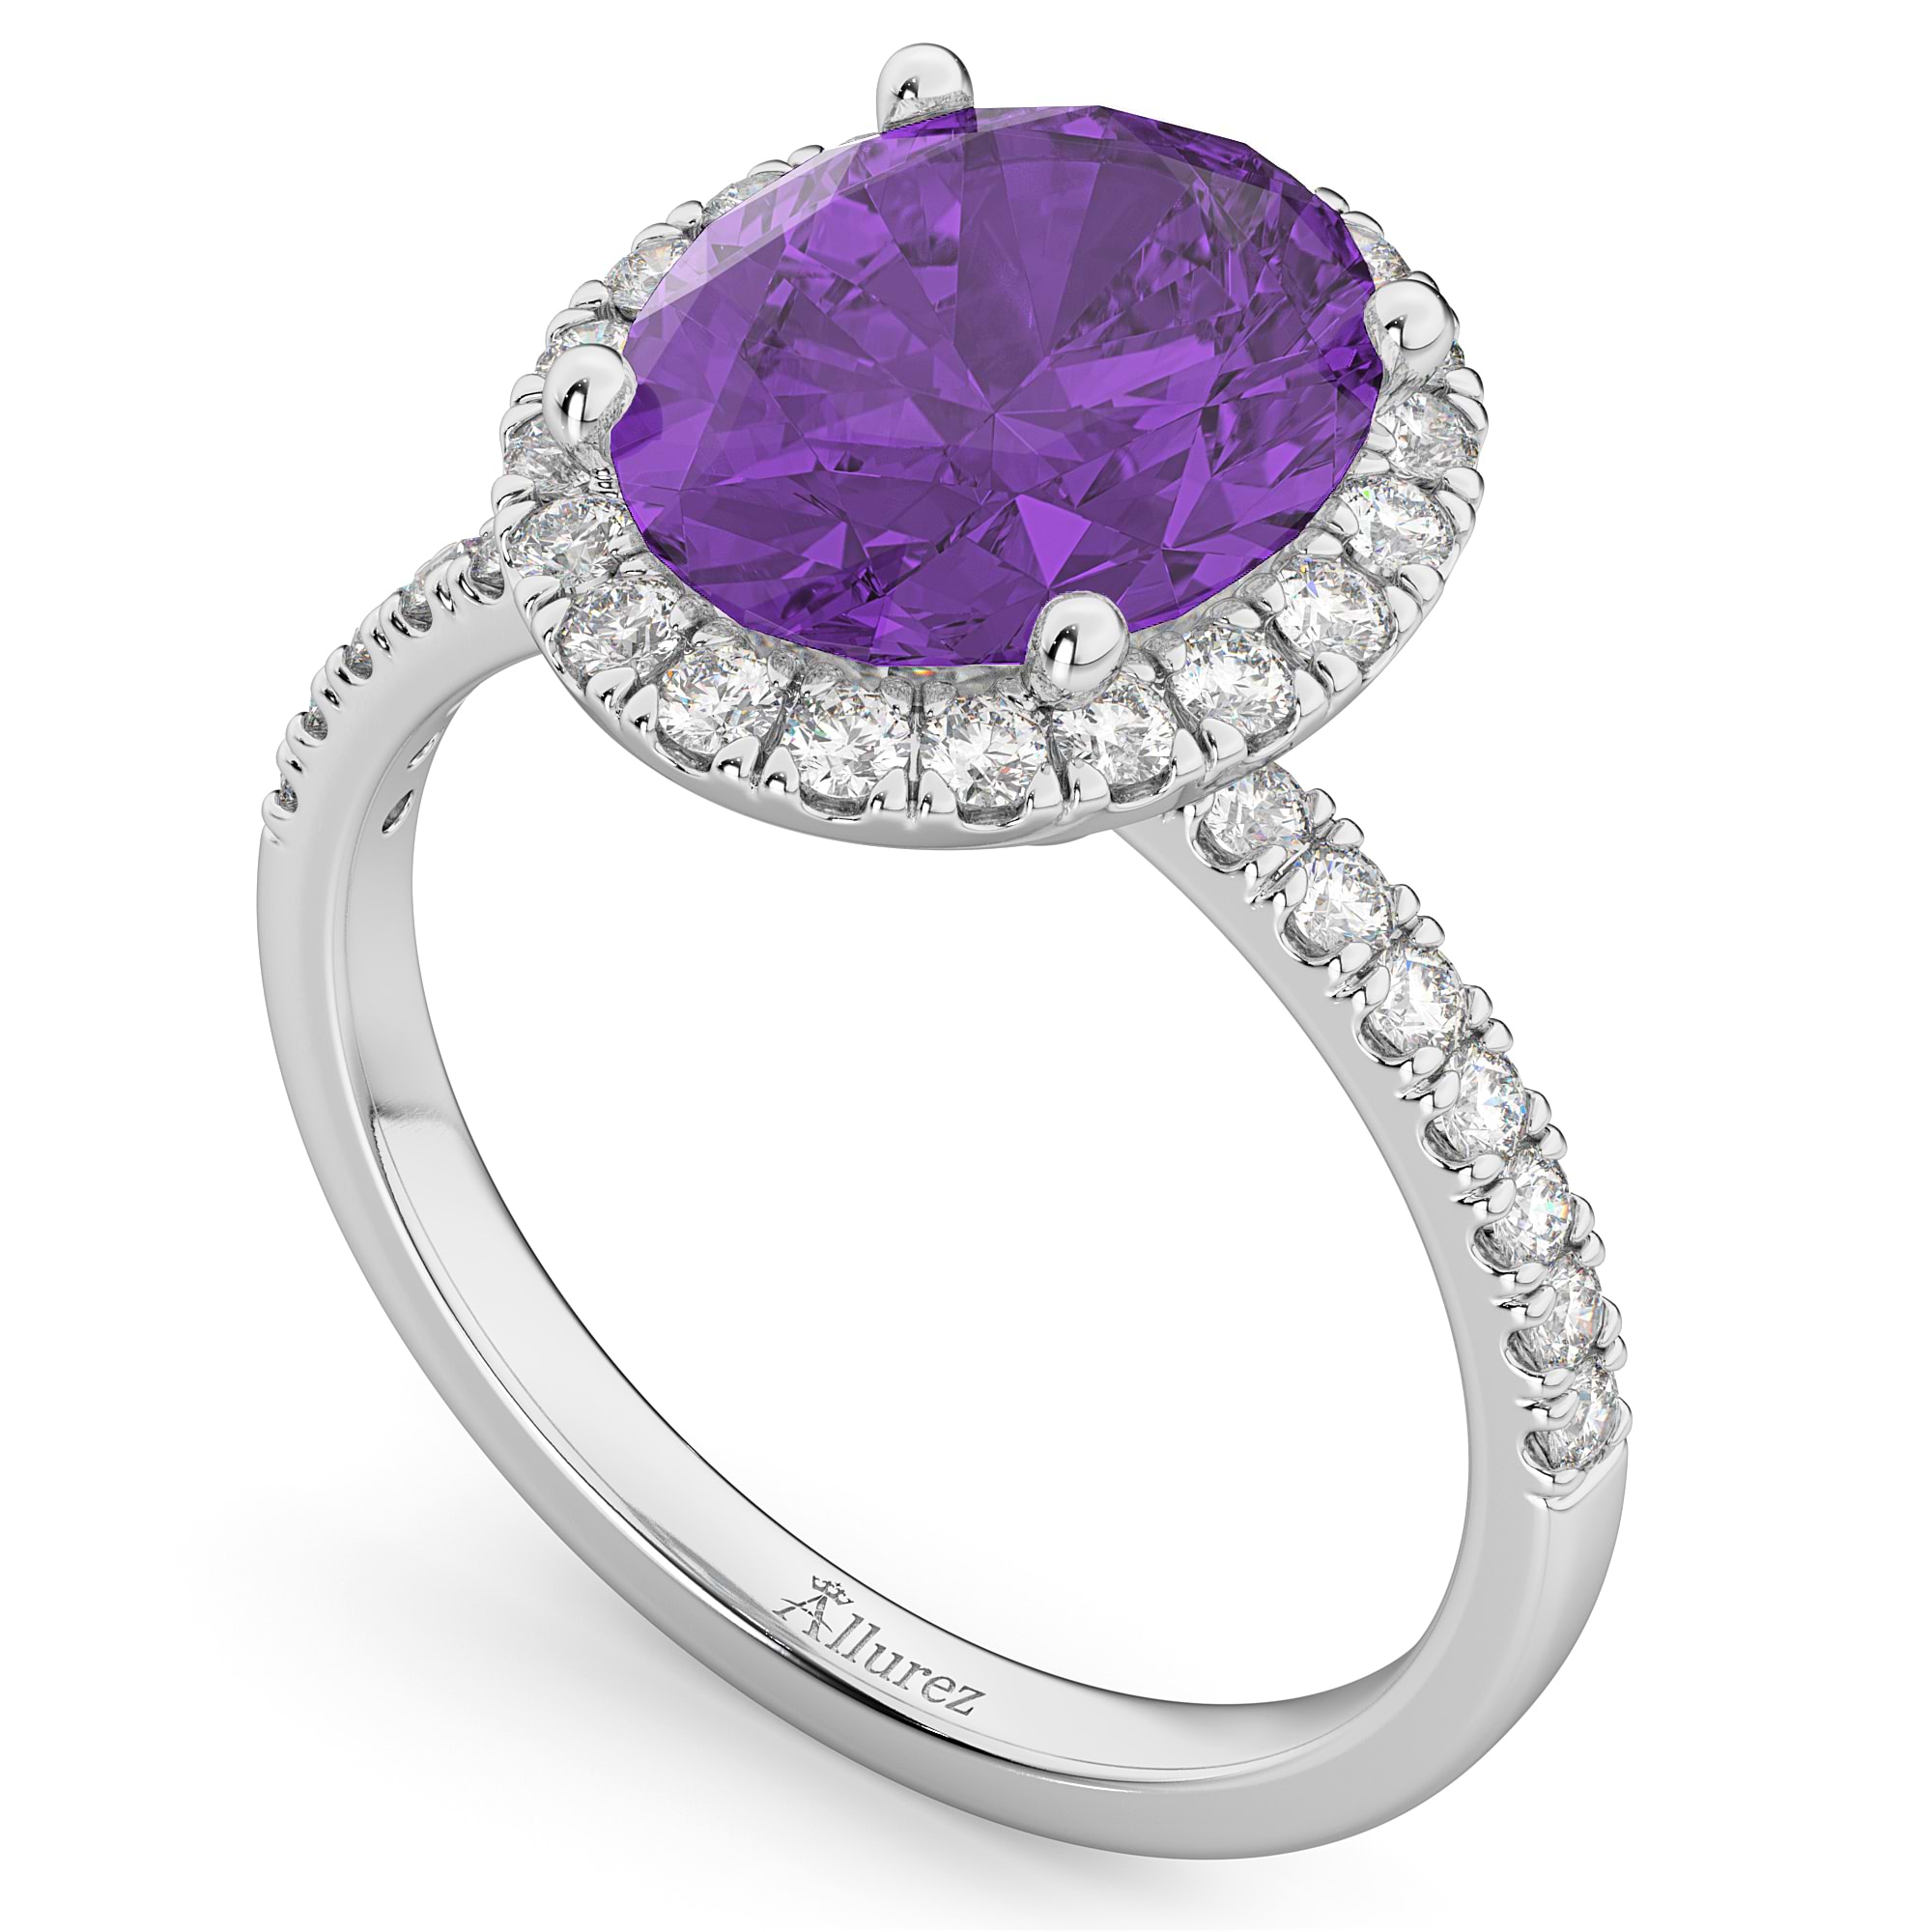 Oval Cut Halo Amethyst & Diamond Engagement Ring 14K White Gold 2.91ct